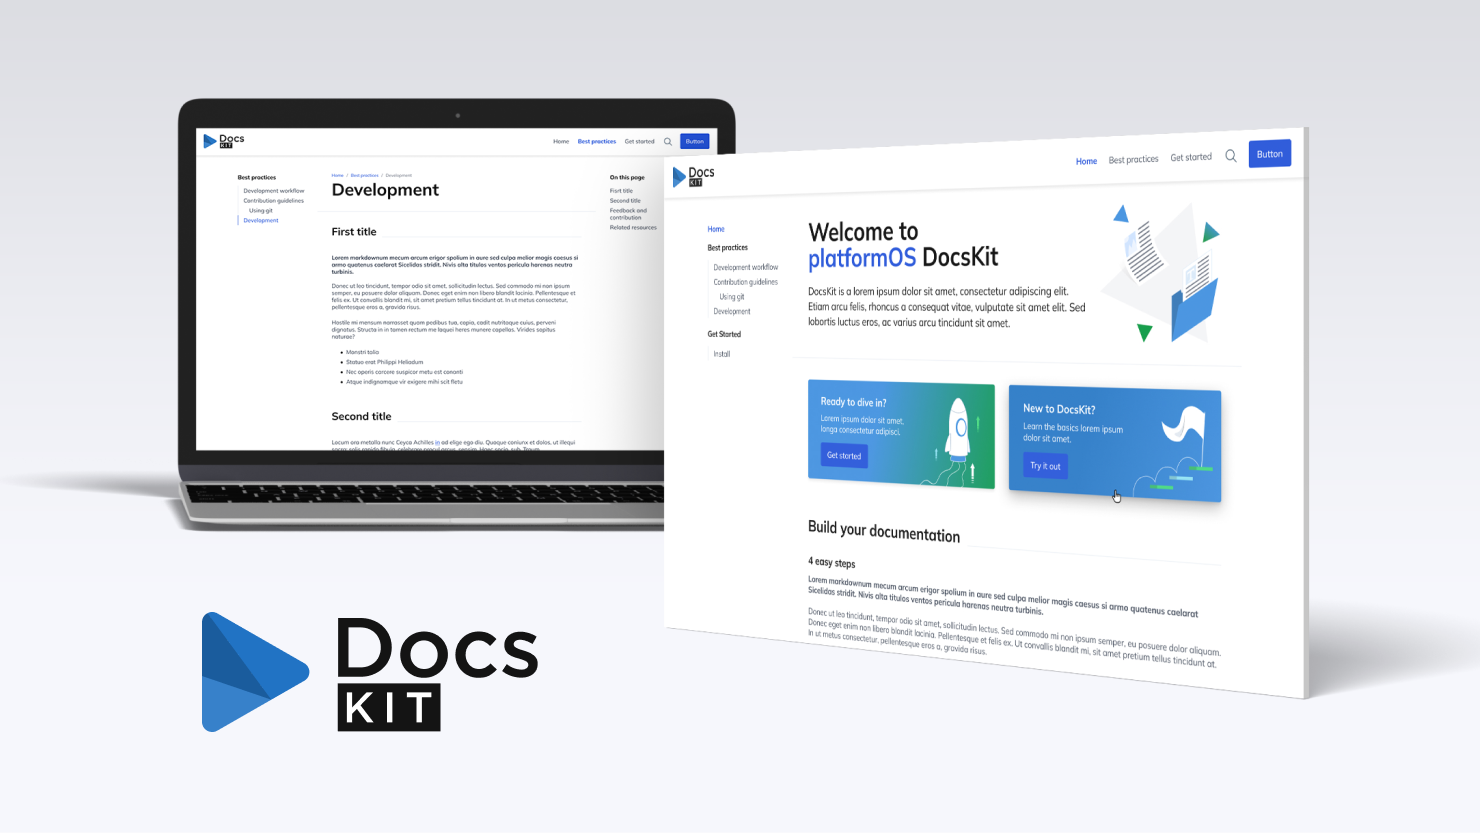 DocsKit home page and inner page screenshots